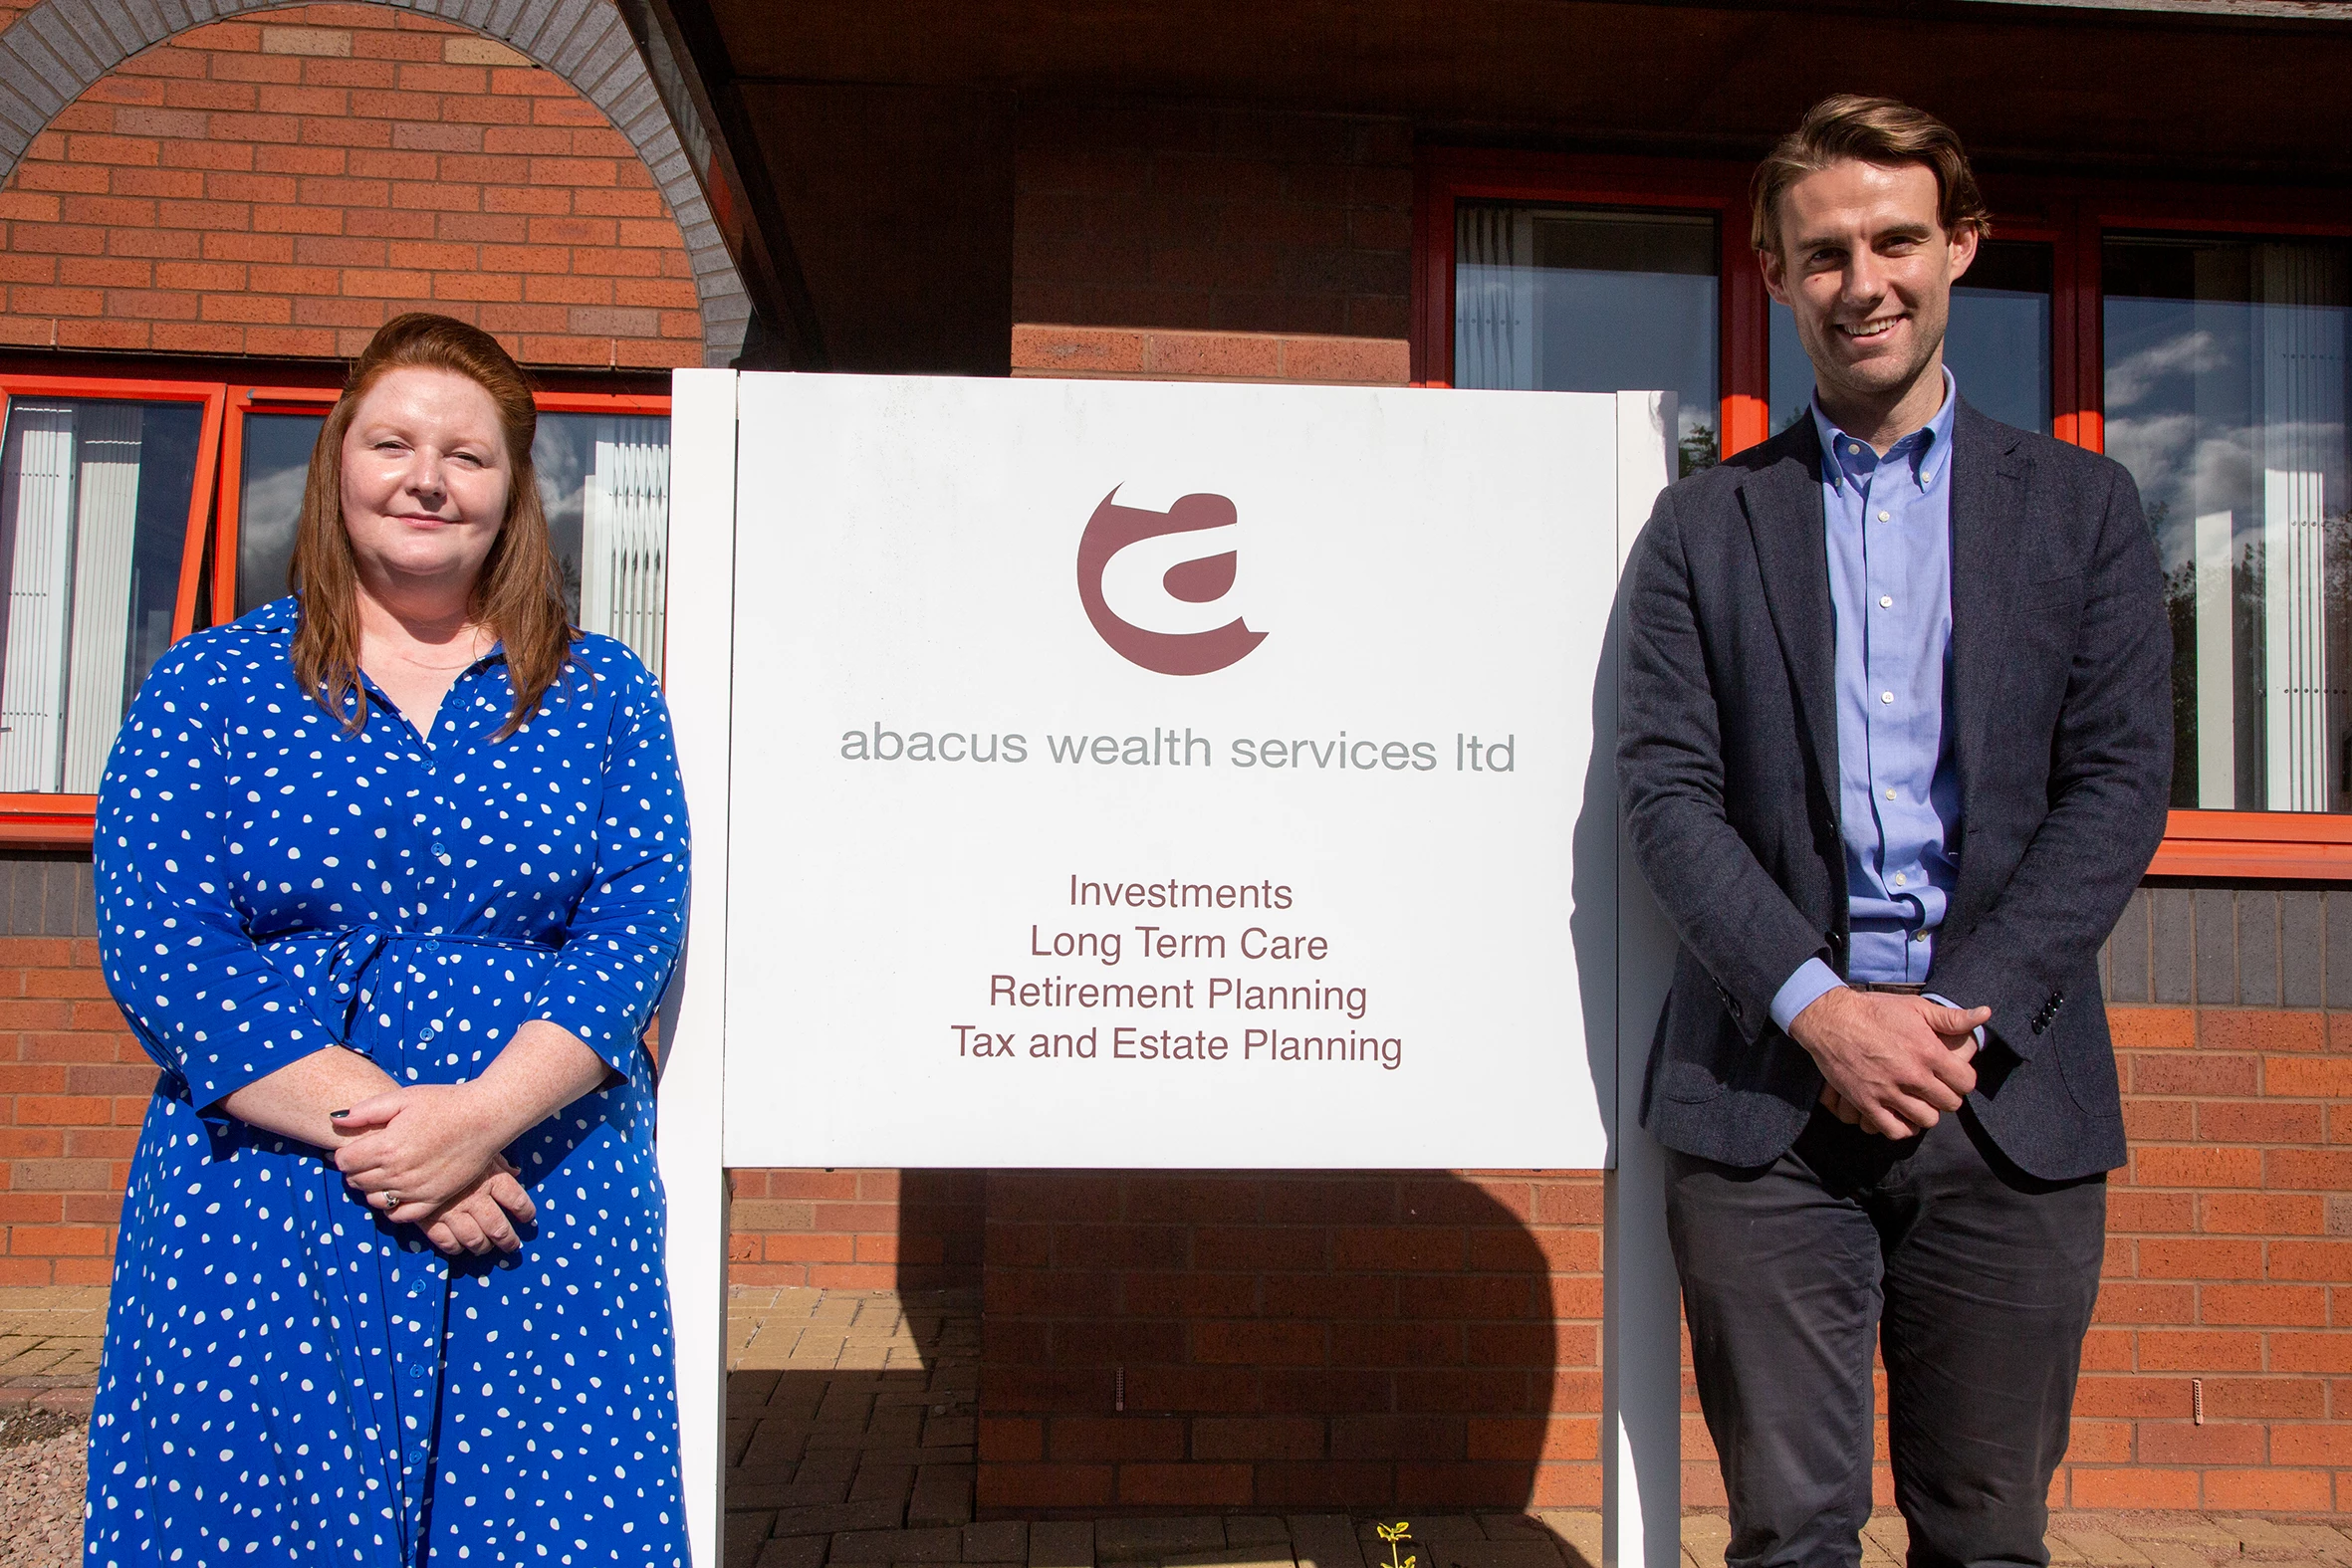 Operations Manager Helen Spicer and Financial Adviser Mike Round of Abacus Wealth Services Ltd